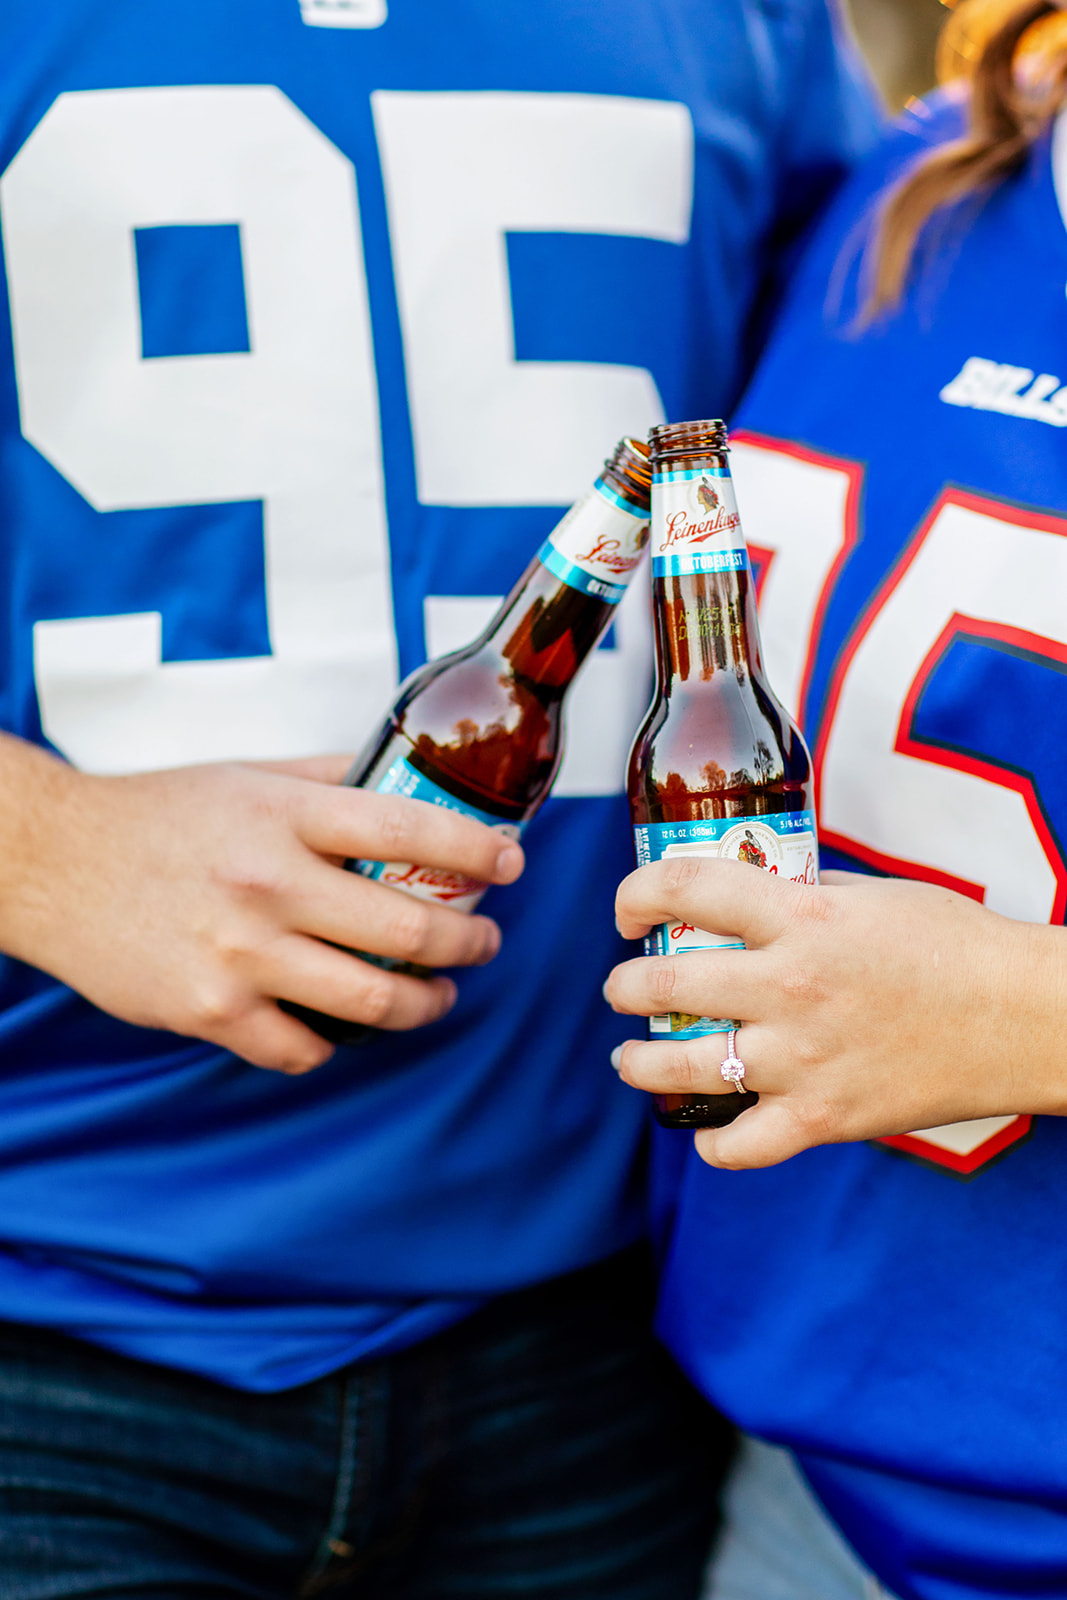 Beer  Football Themed Engagement Photo Shoot - Image Property of www.j-dphoto.com